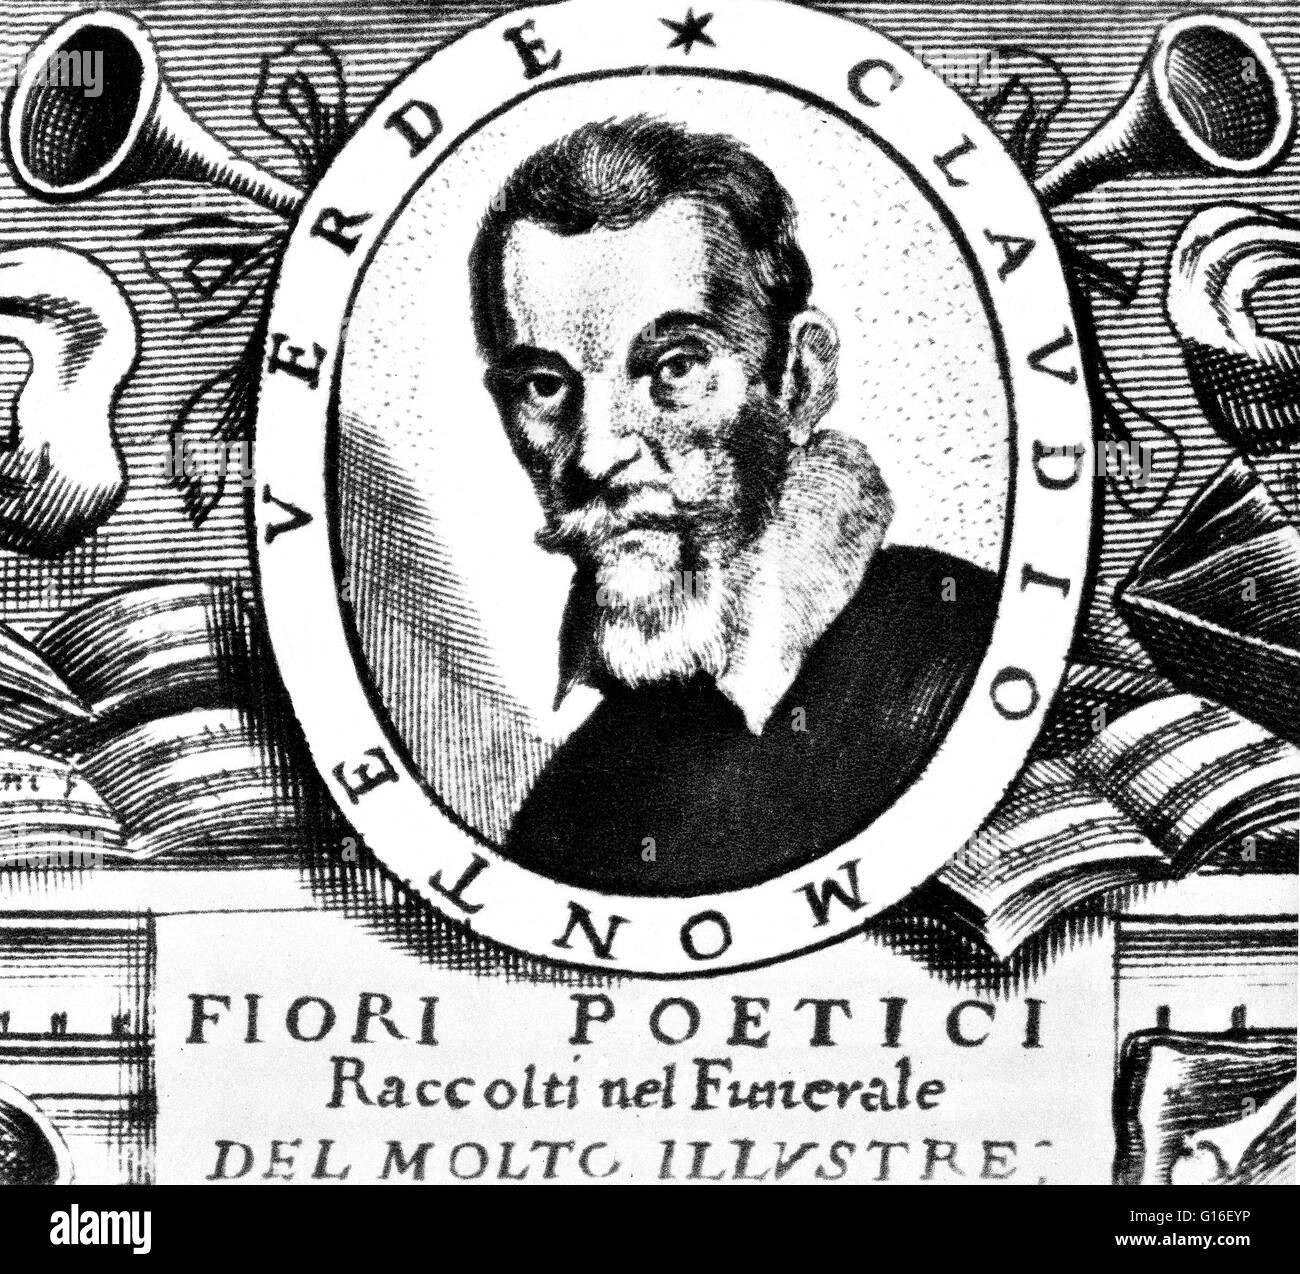 Claudio Giovanni Antonio Monteverdi (May 15, 1567 (baptized) - November 29, 1643) was an Italian composer, gambist (bowed, fretted and stringed instrument), singer and Roman Catholic priest. He learned about music as a member of the cathedral choir. He al Stock Photo